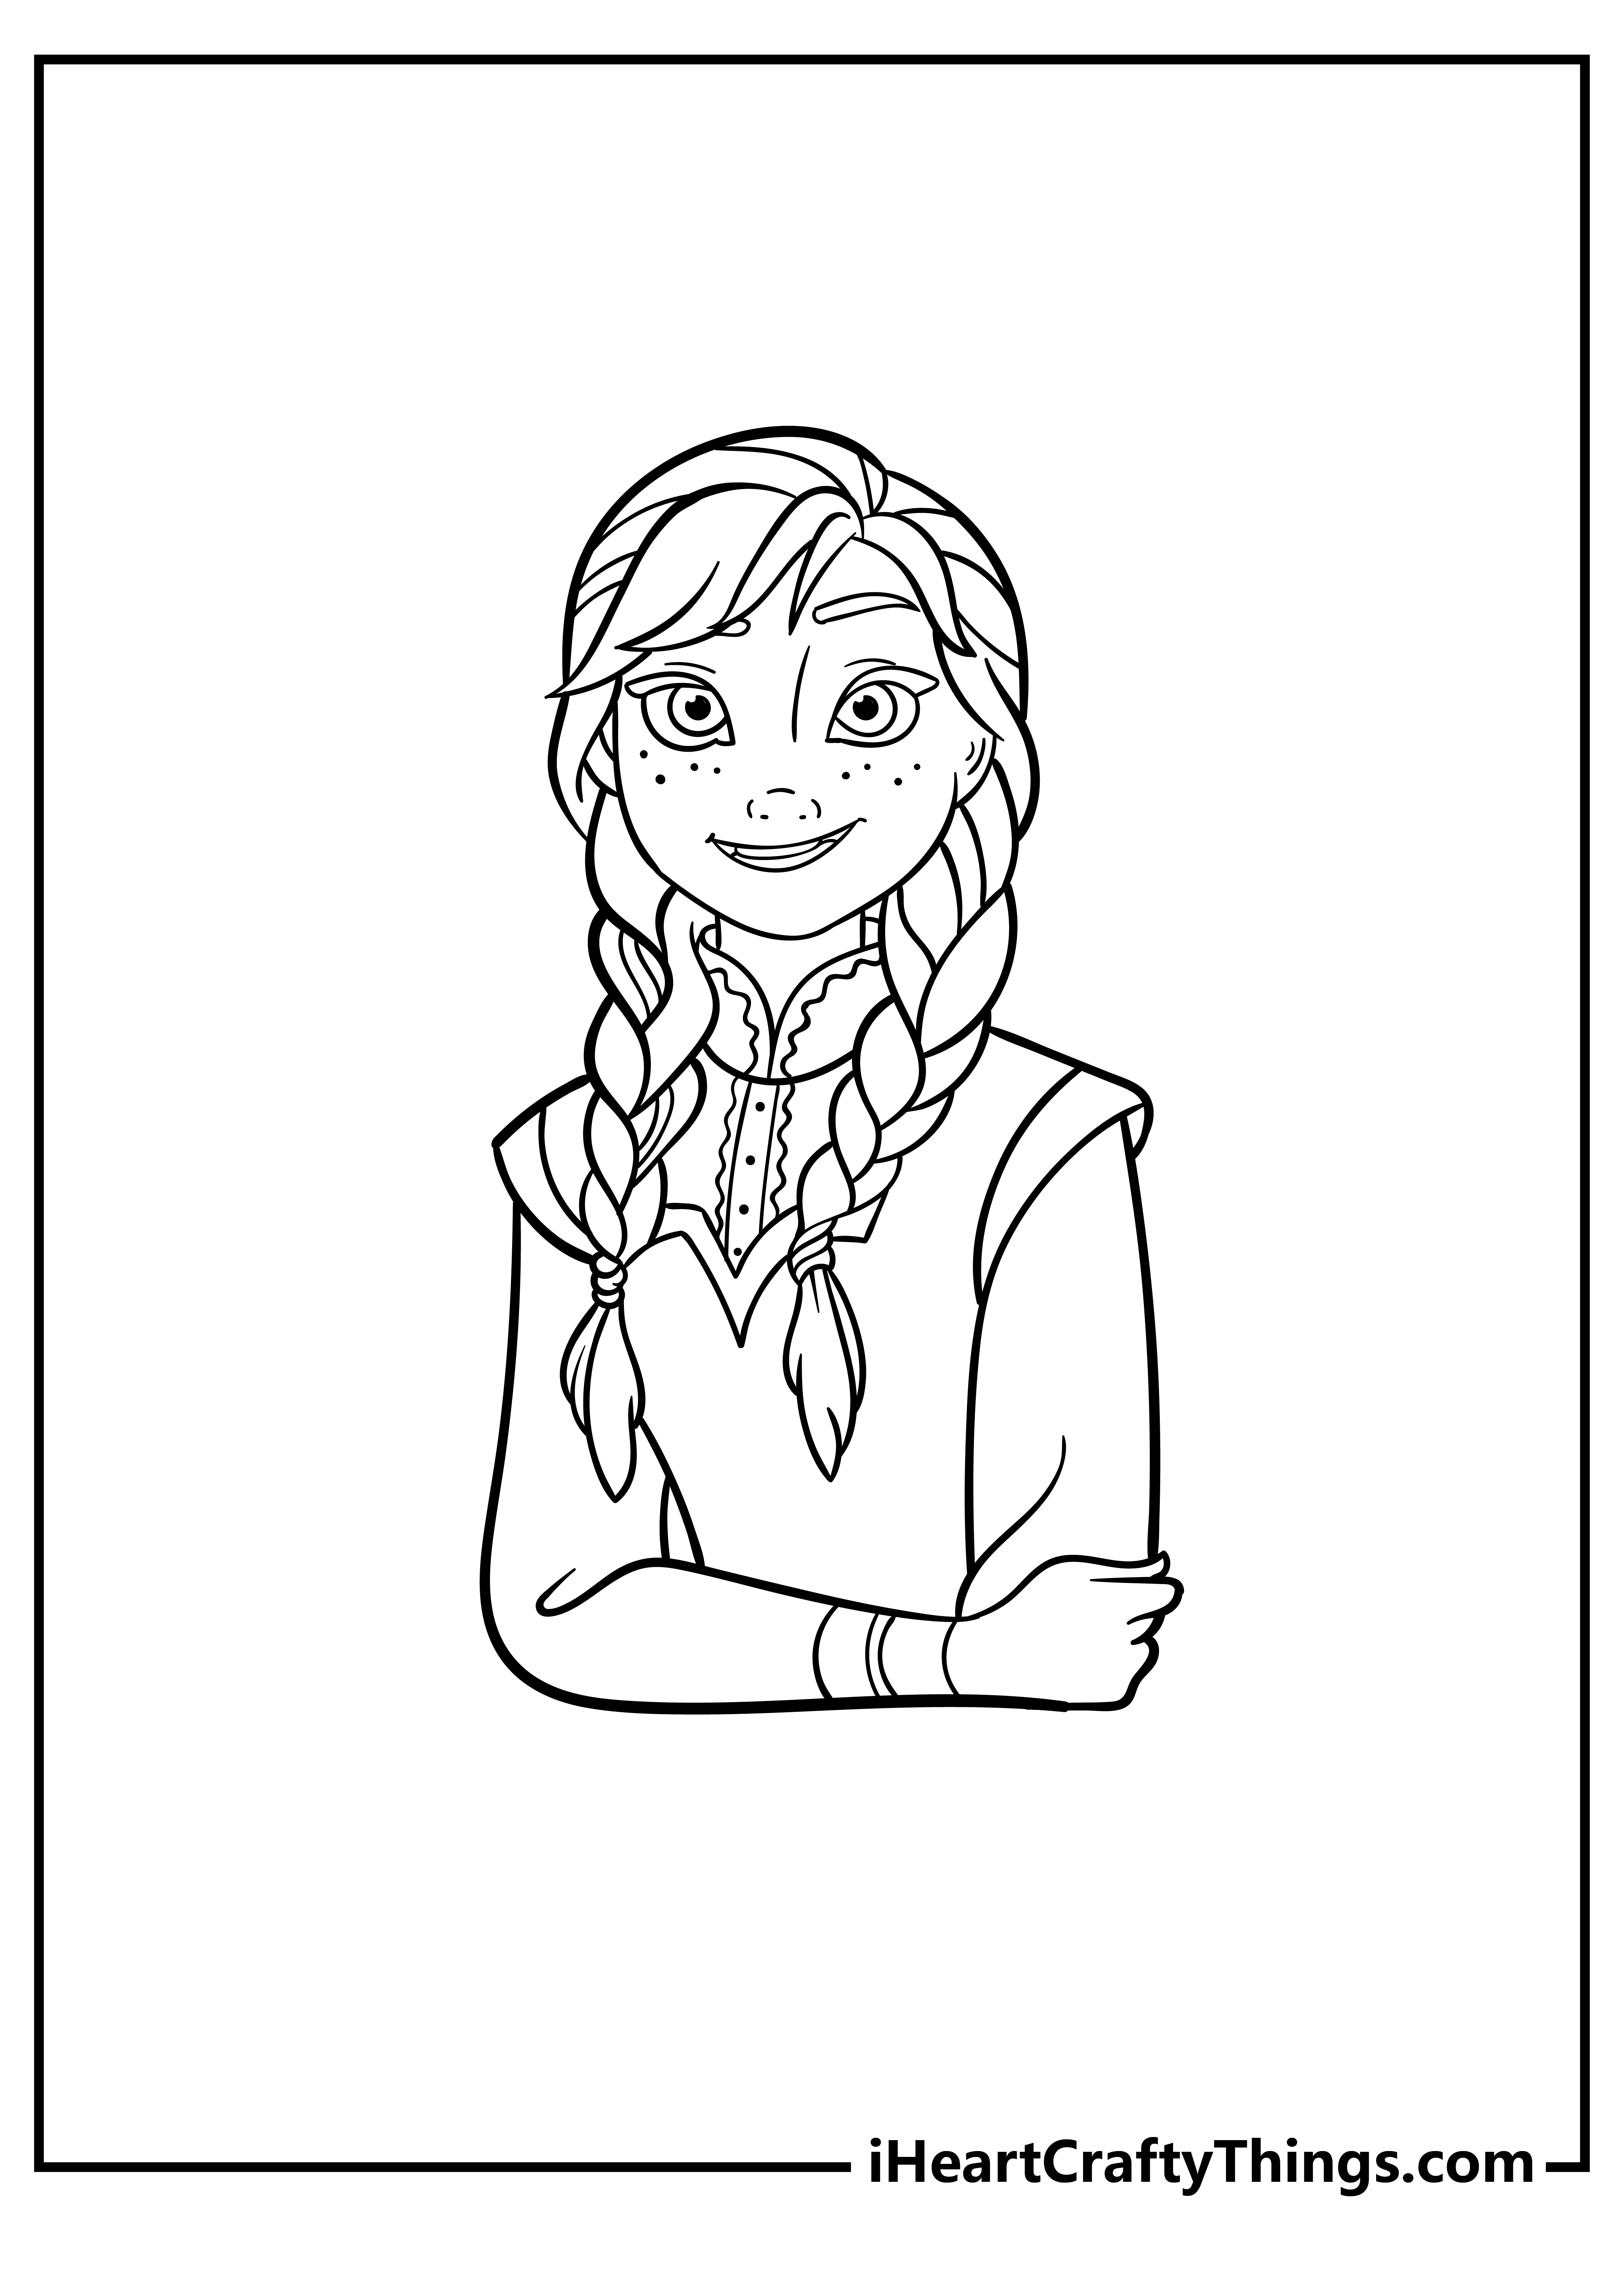 Elsa and Anna Coloring Pages for adults free printable